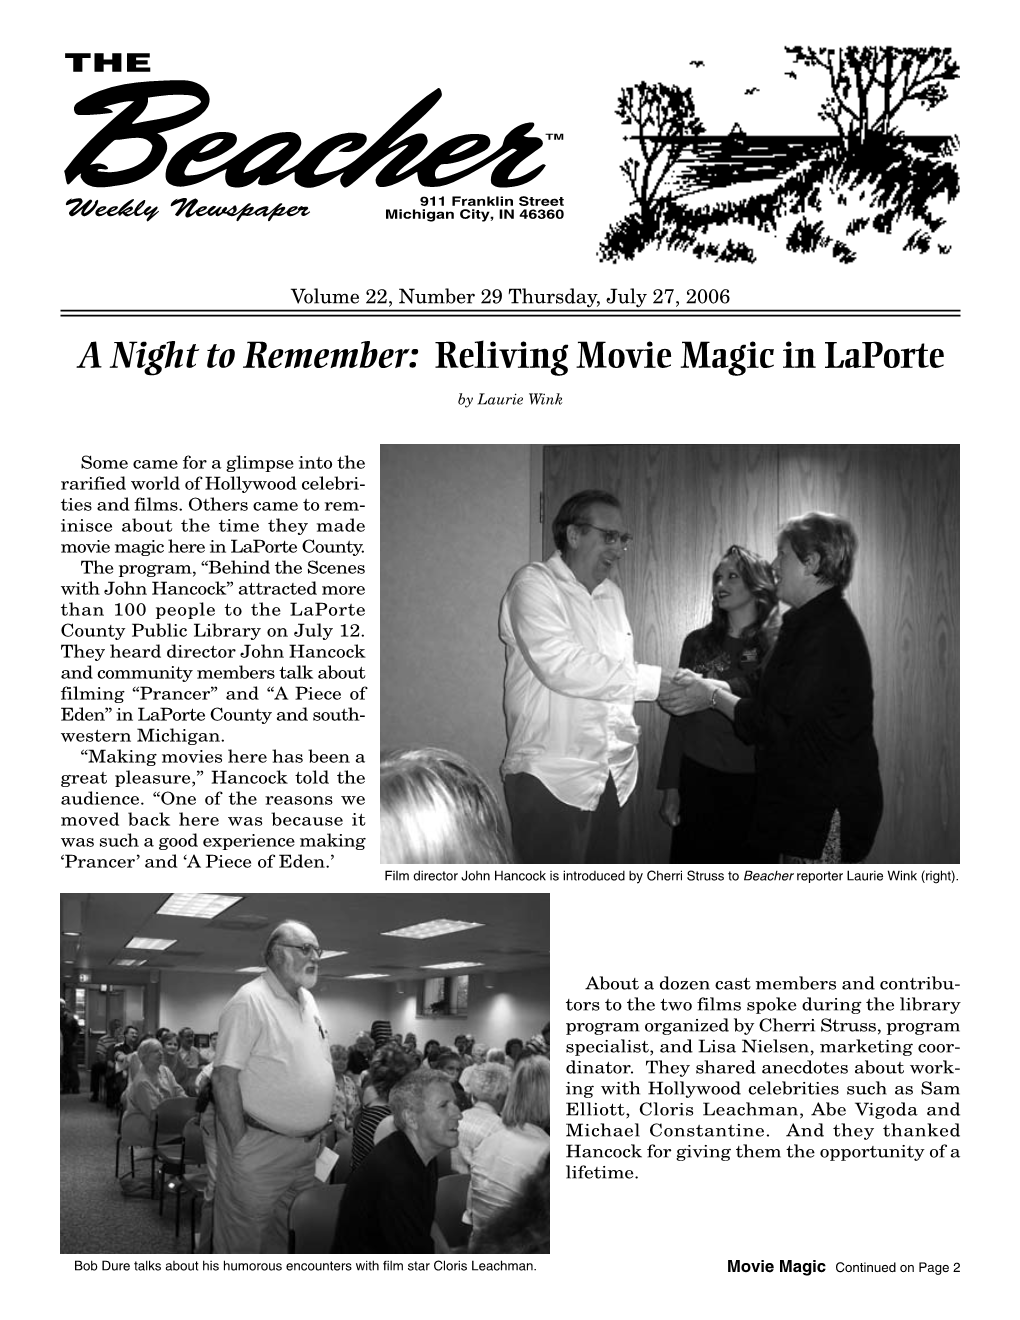 A Night to Remember: Reliving Movie Magic in Laporte